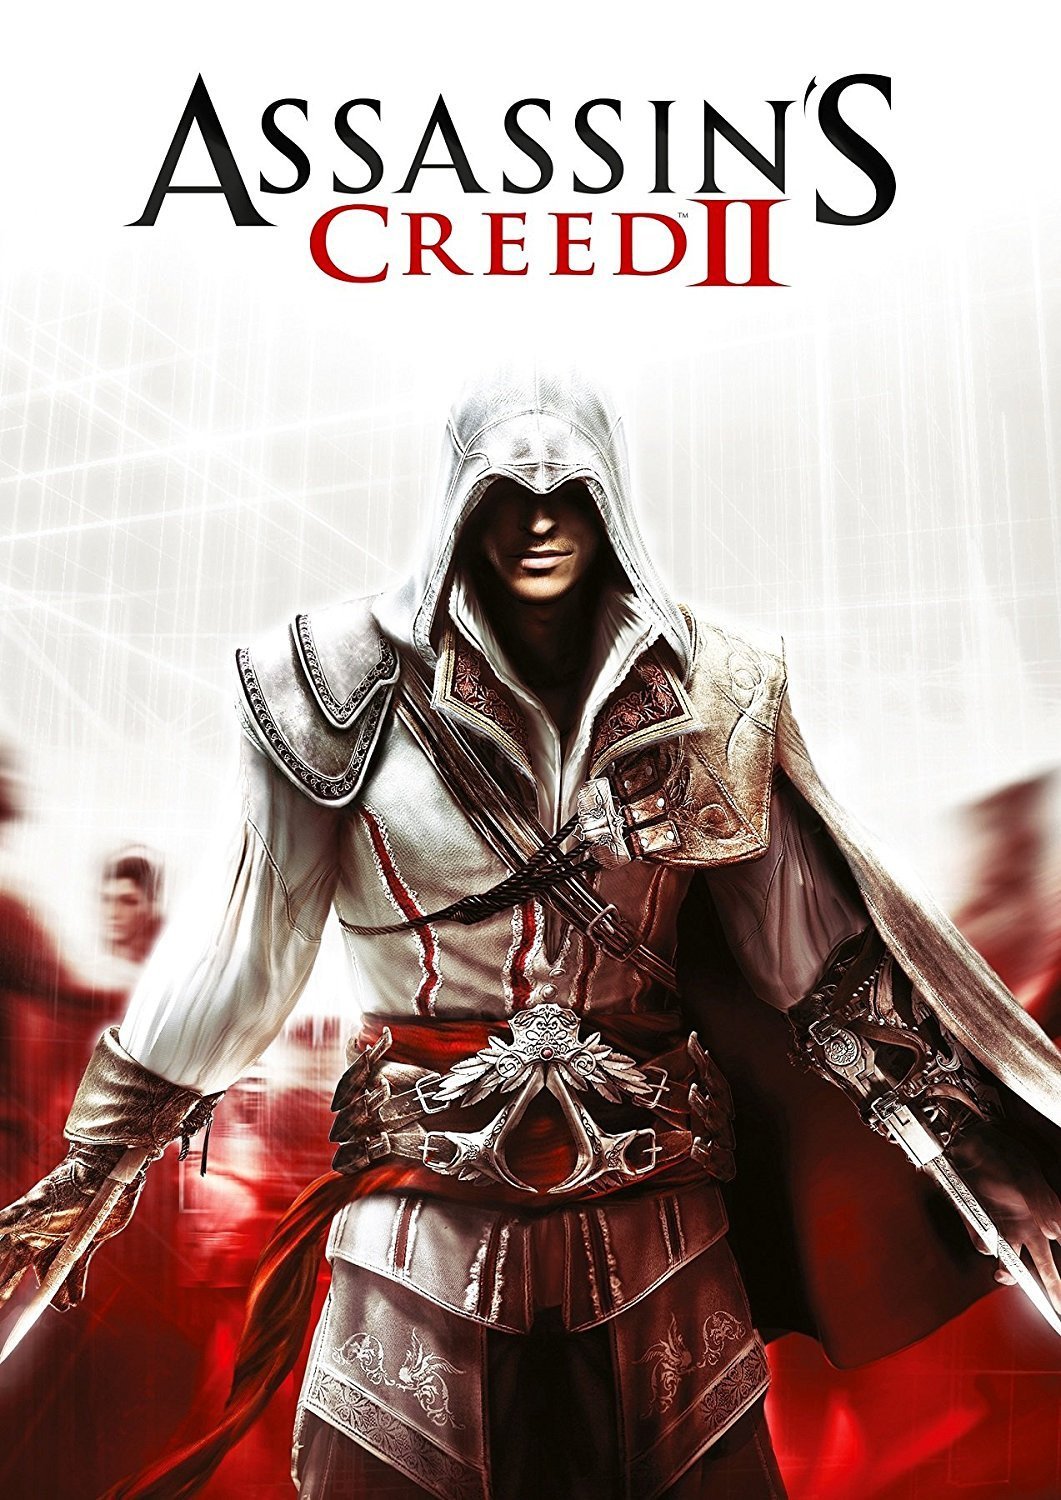 Image of Assassin's Creed II